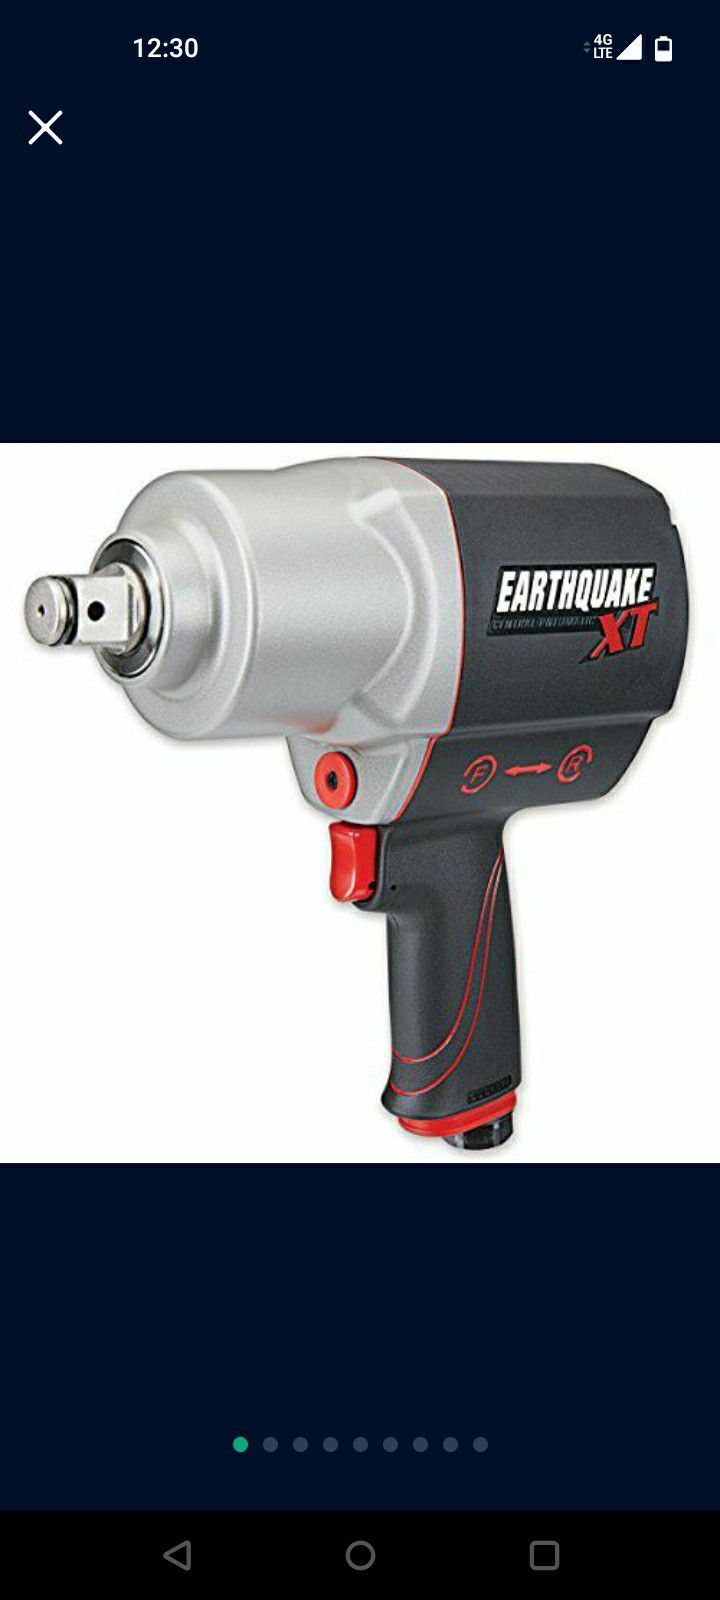 BRAND NEW Open Box Earthquake XT Composite 3/4" Xtreme Torque Air Impact Wrench 1500 ftlbs torque FOR ONLY $100 FIRM ON PRICE 